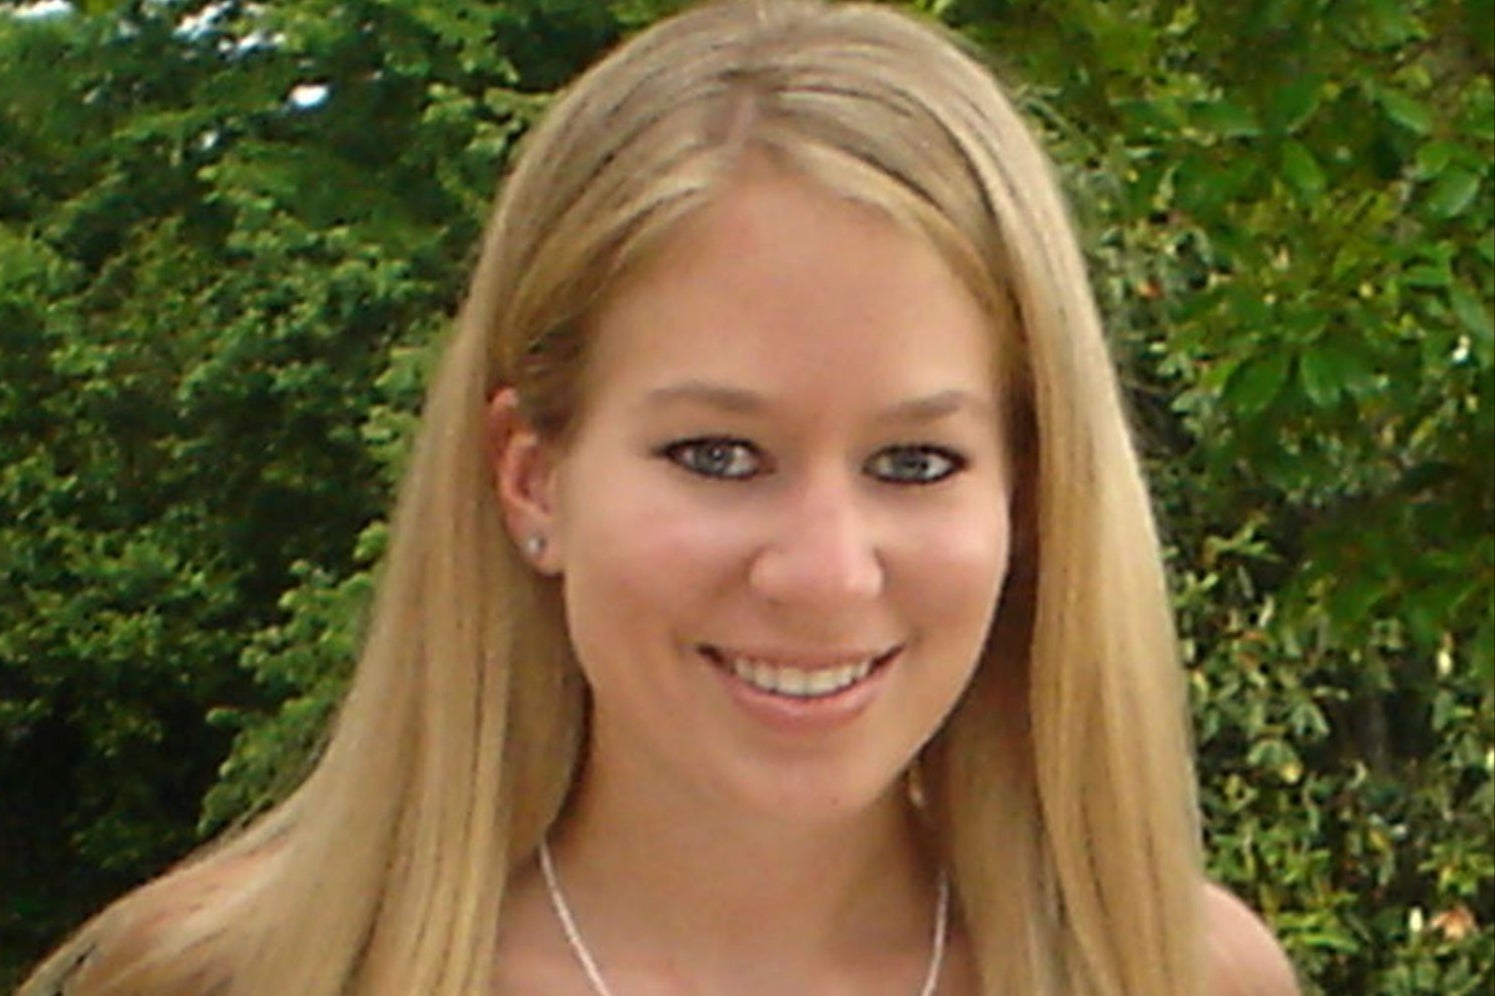 Natalee Holloway’s remains have never been found and she was declared legally dead in 2012